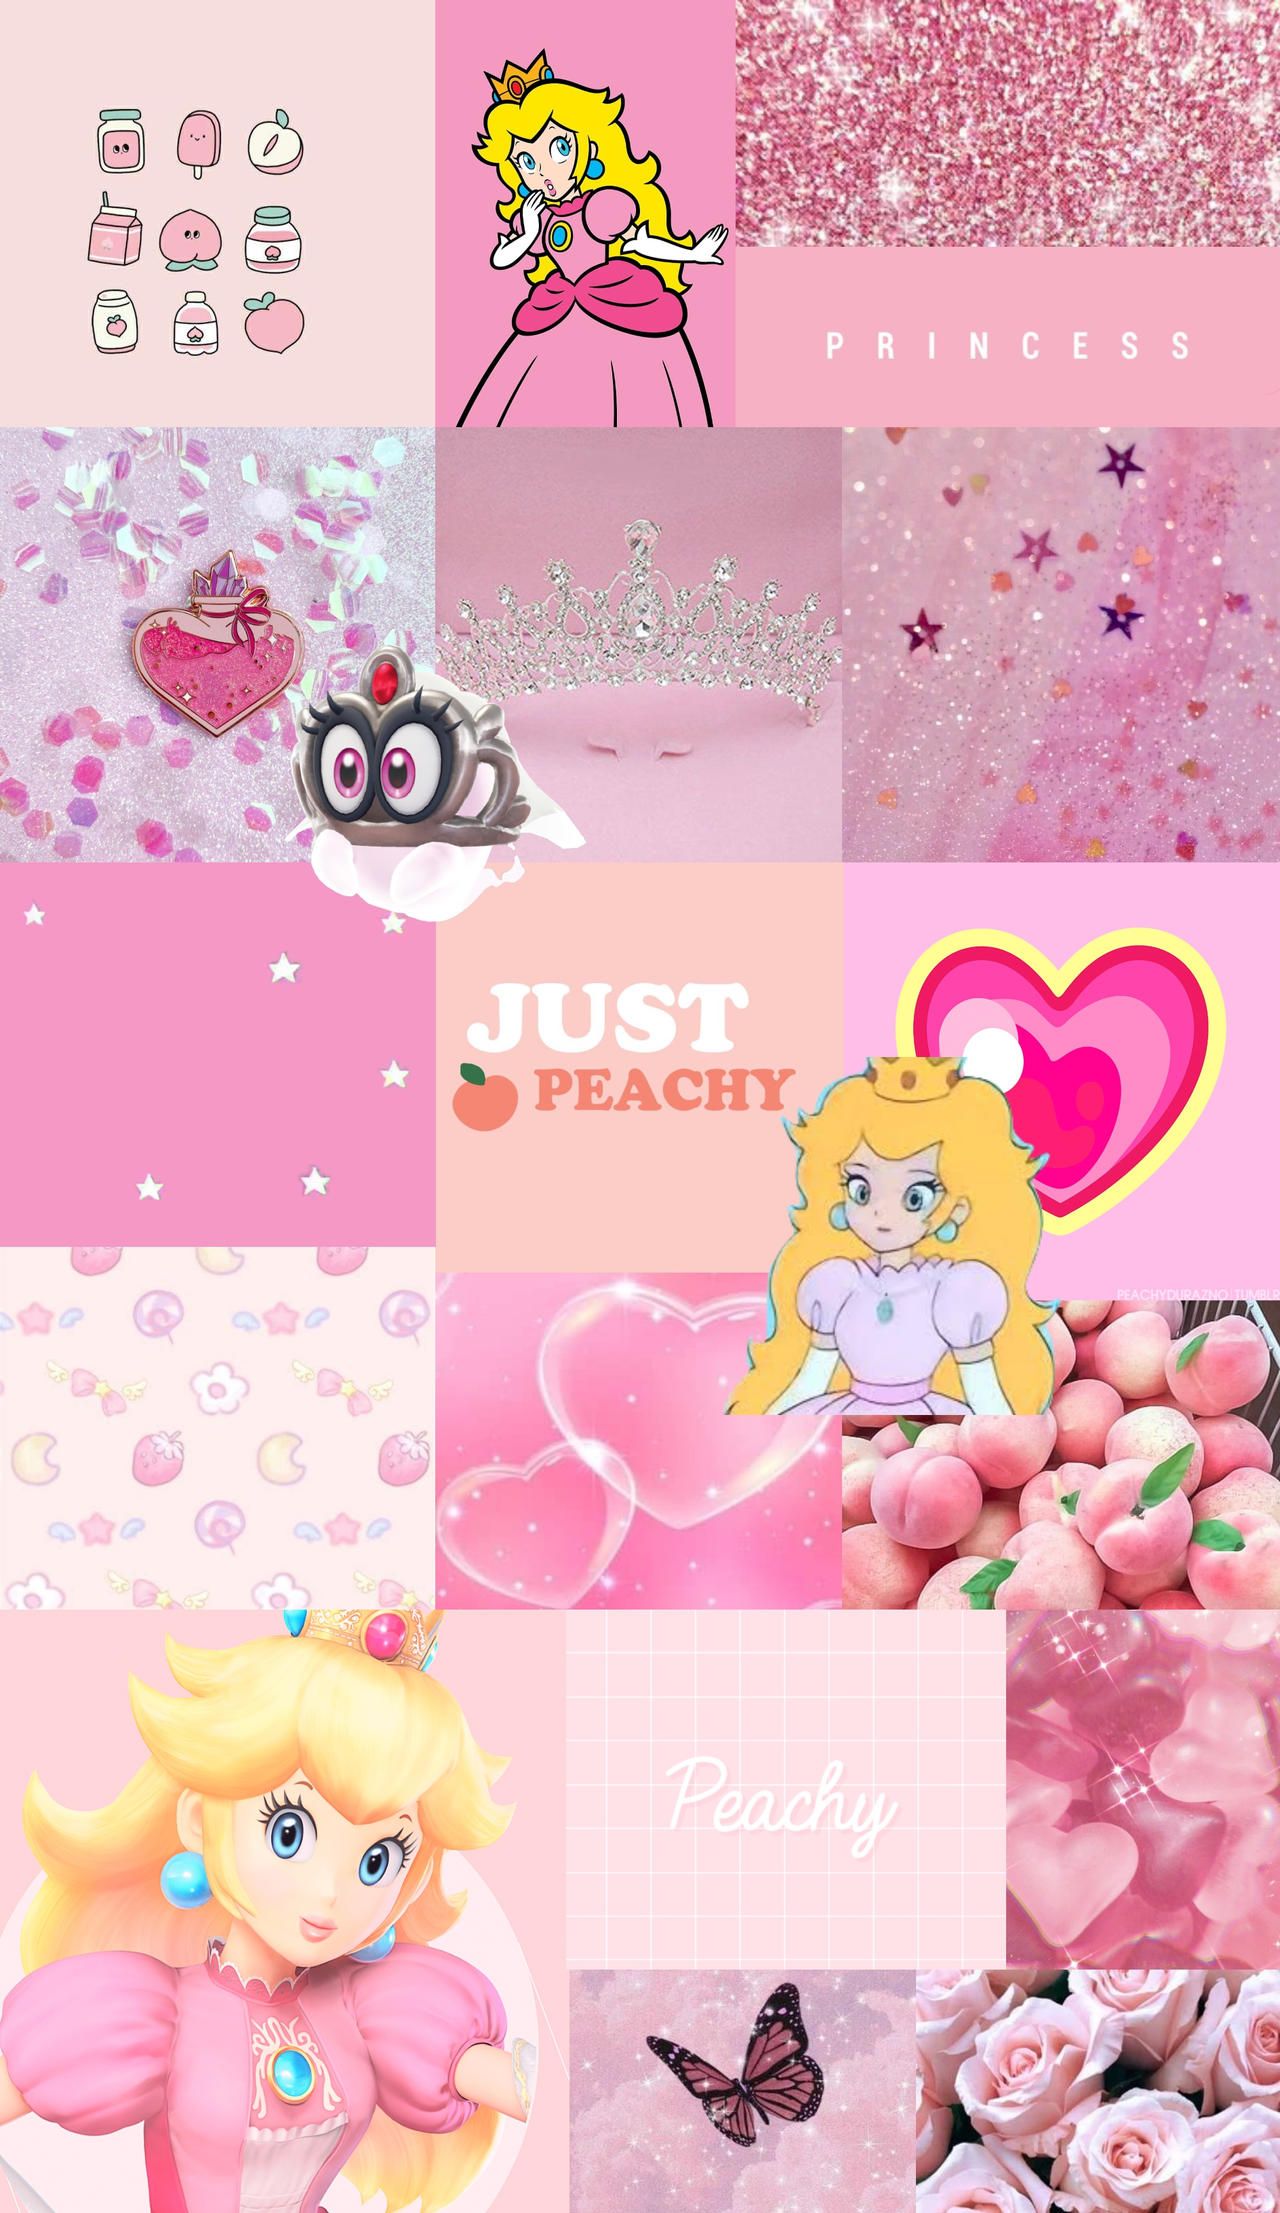 A collage of pictures with pink backgrounds - Princess Peach